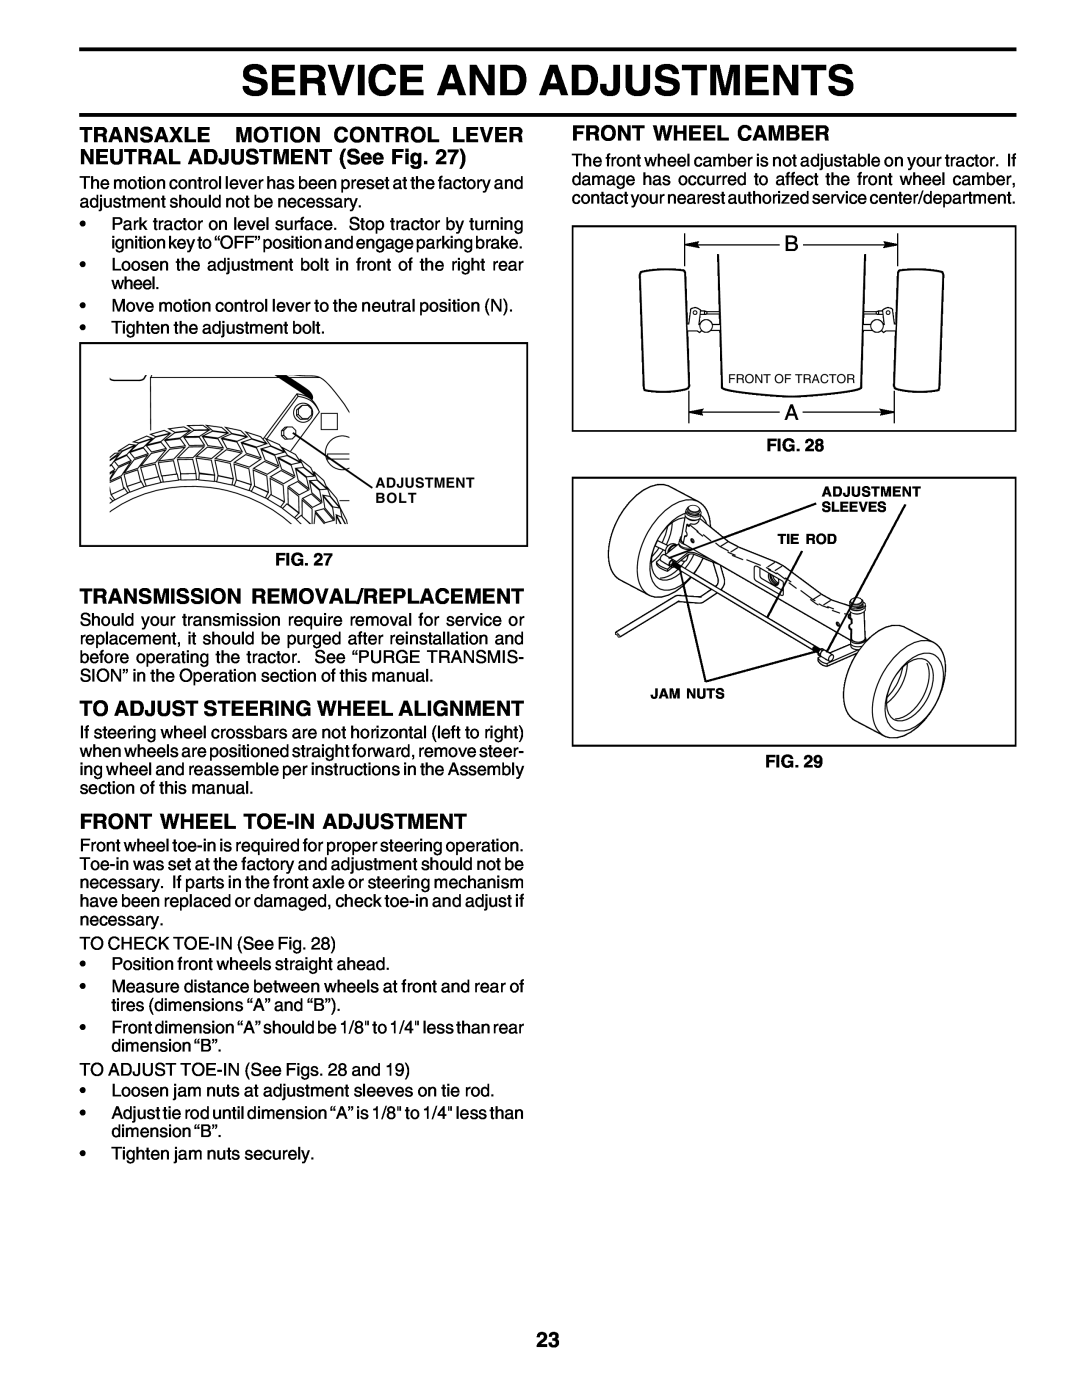 Poulan 178497 Service And Adjustments, TRANSAXLE MOTION CONTROL LEVER NEUTRAL ADJUSTMENT See Fig, Front Wheel Camber 